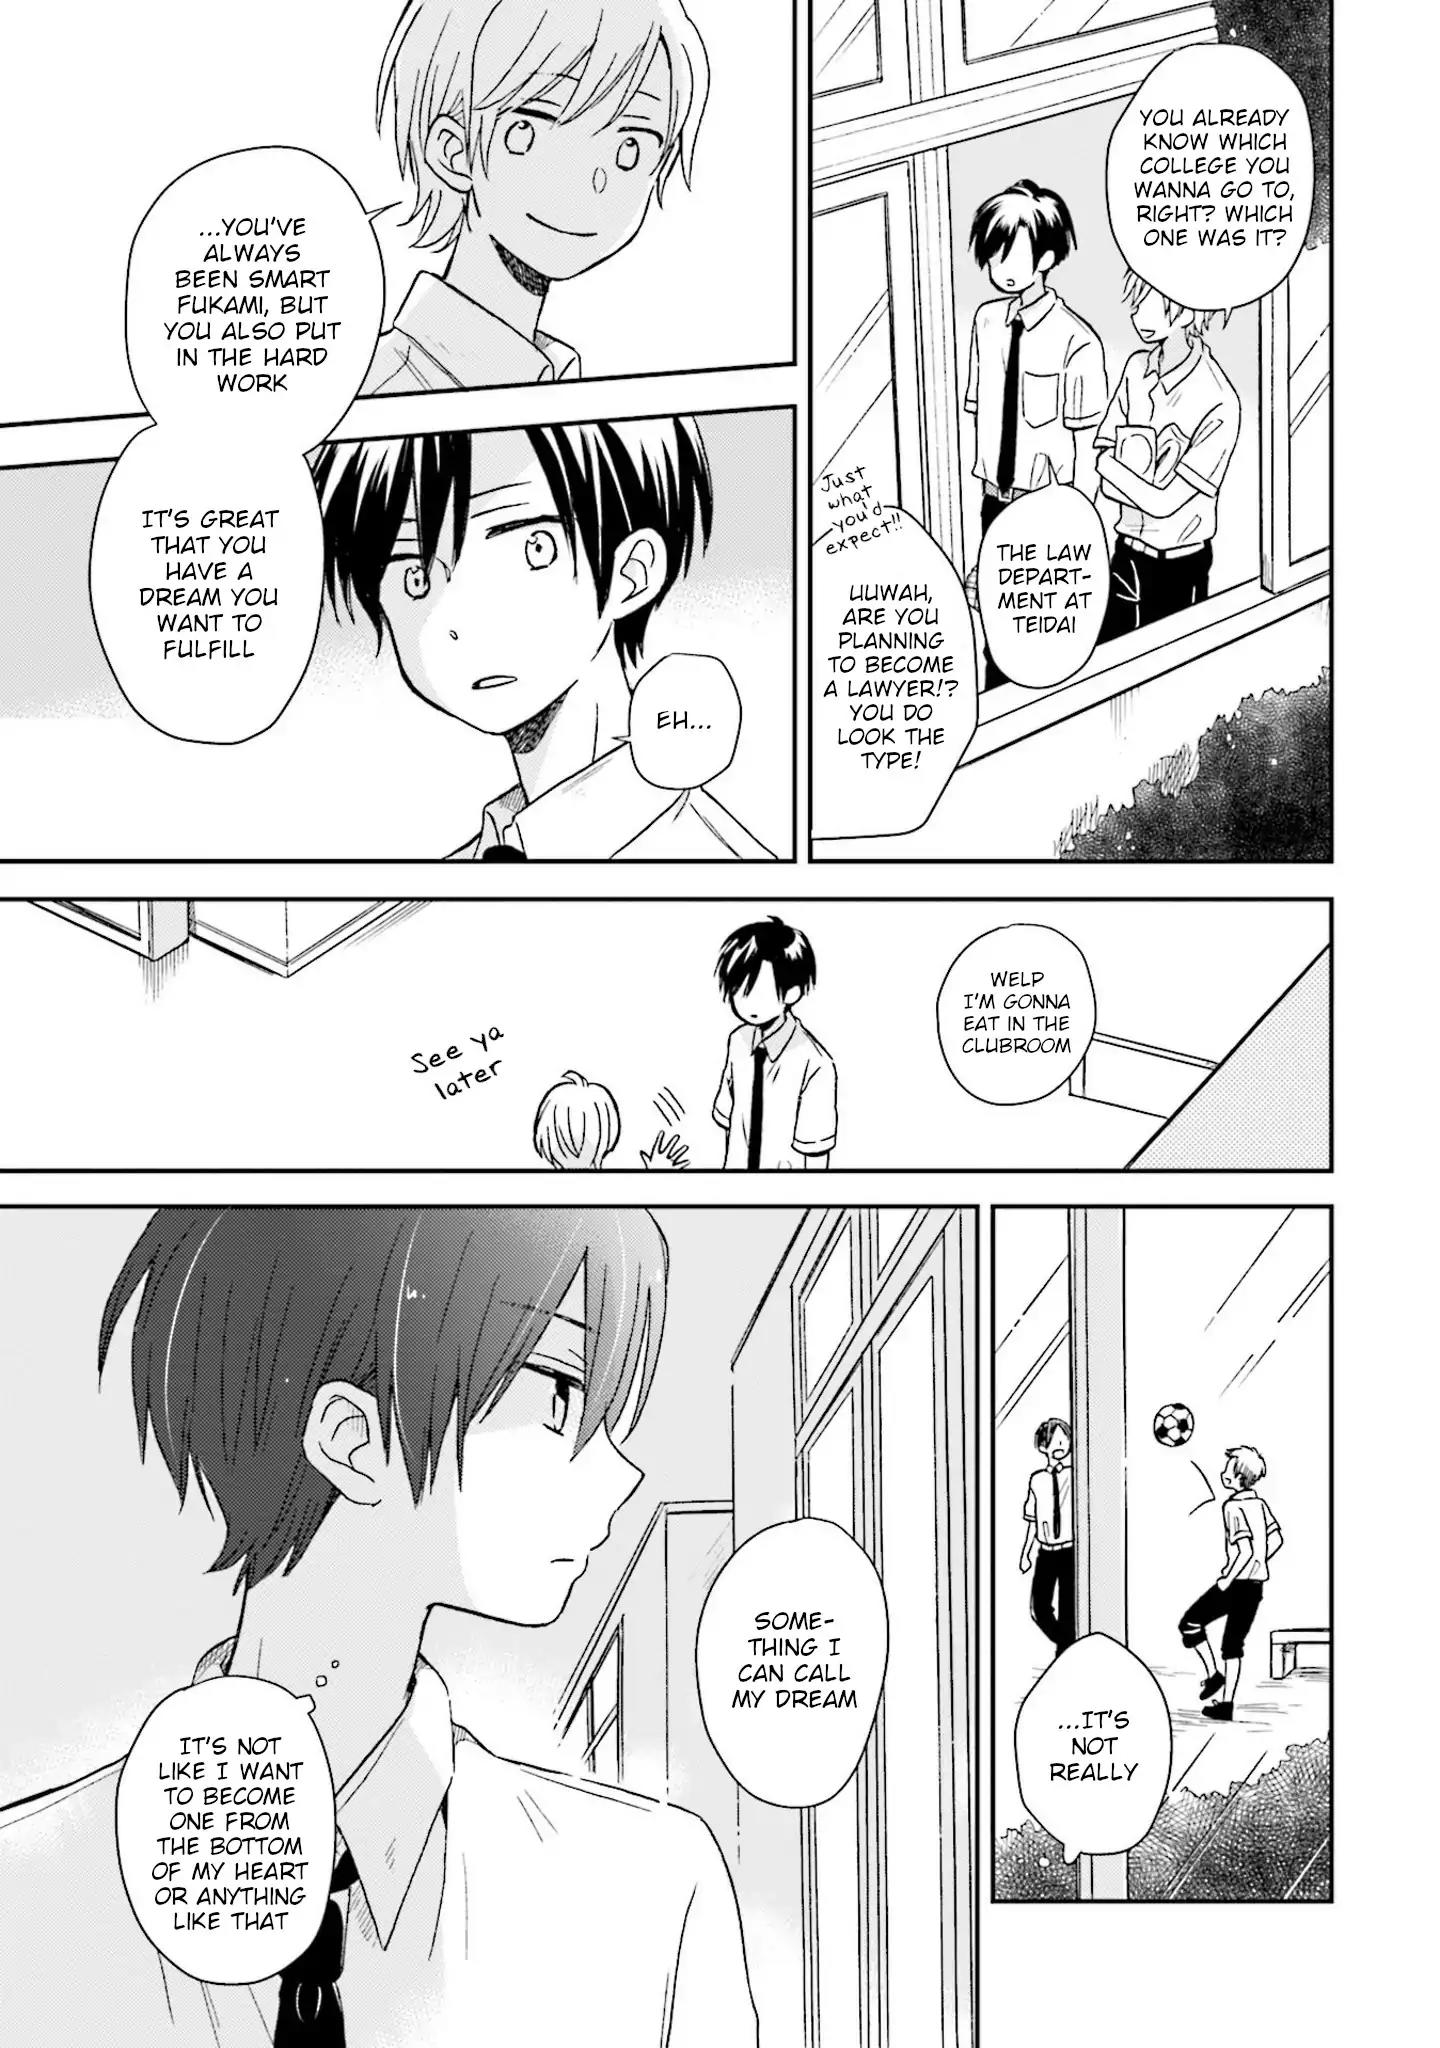 This Love Is Assumption Outside for Fukami Kun Vol.1 Chapter 4